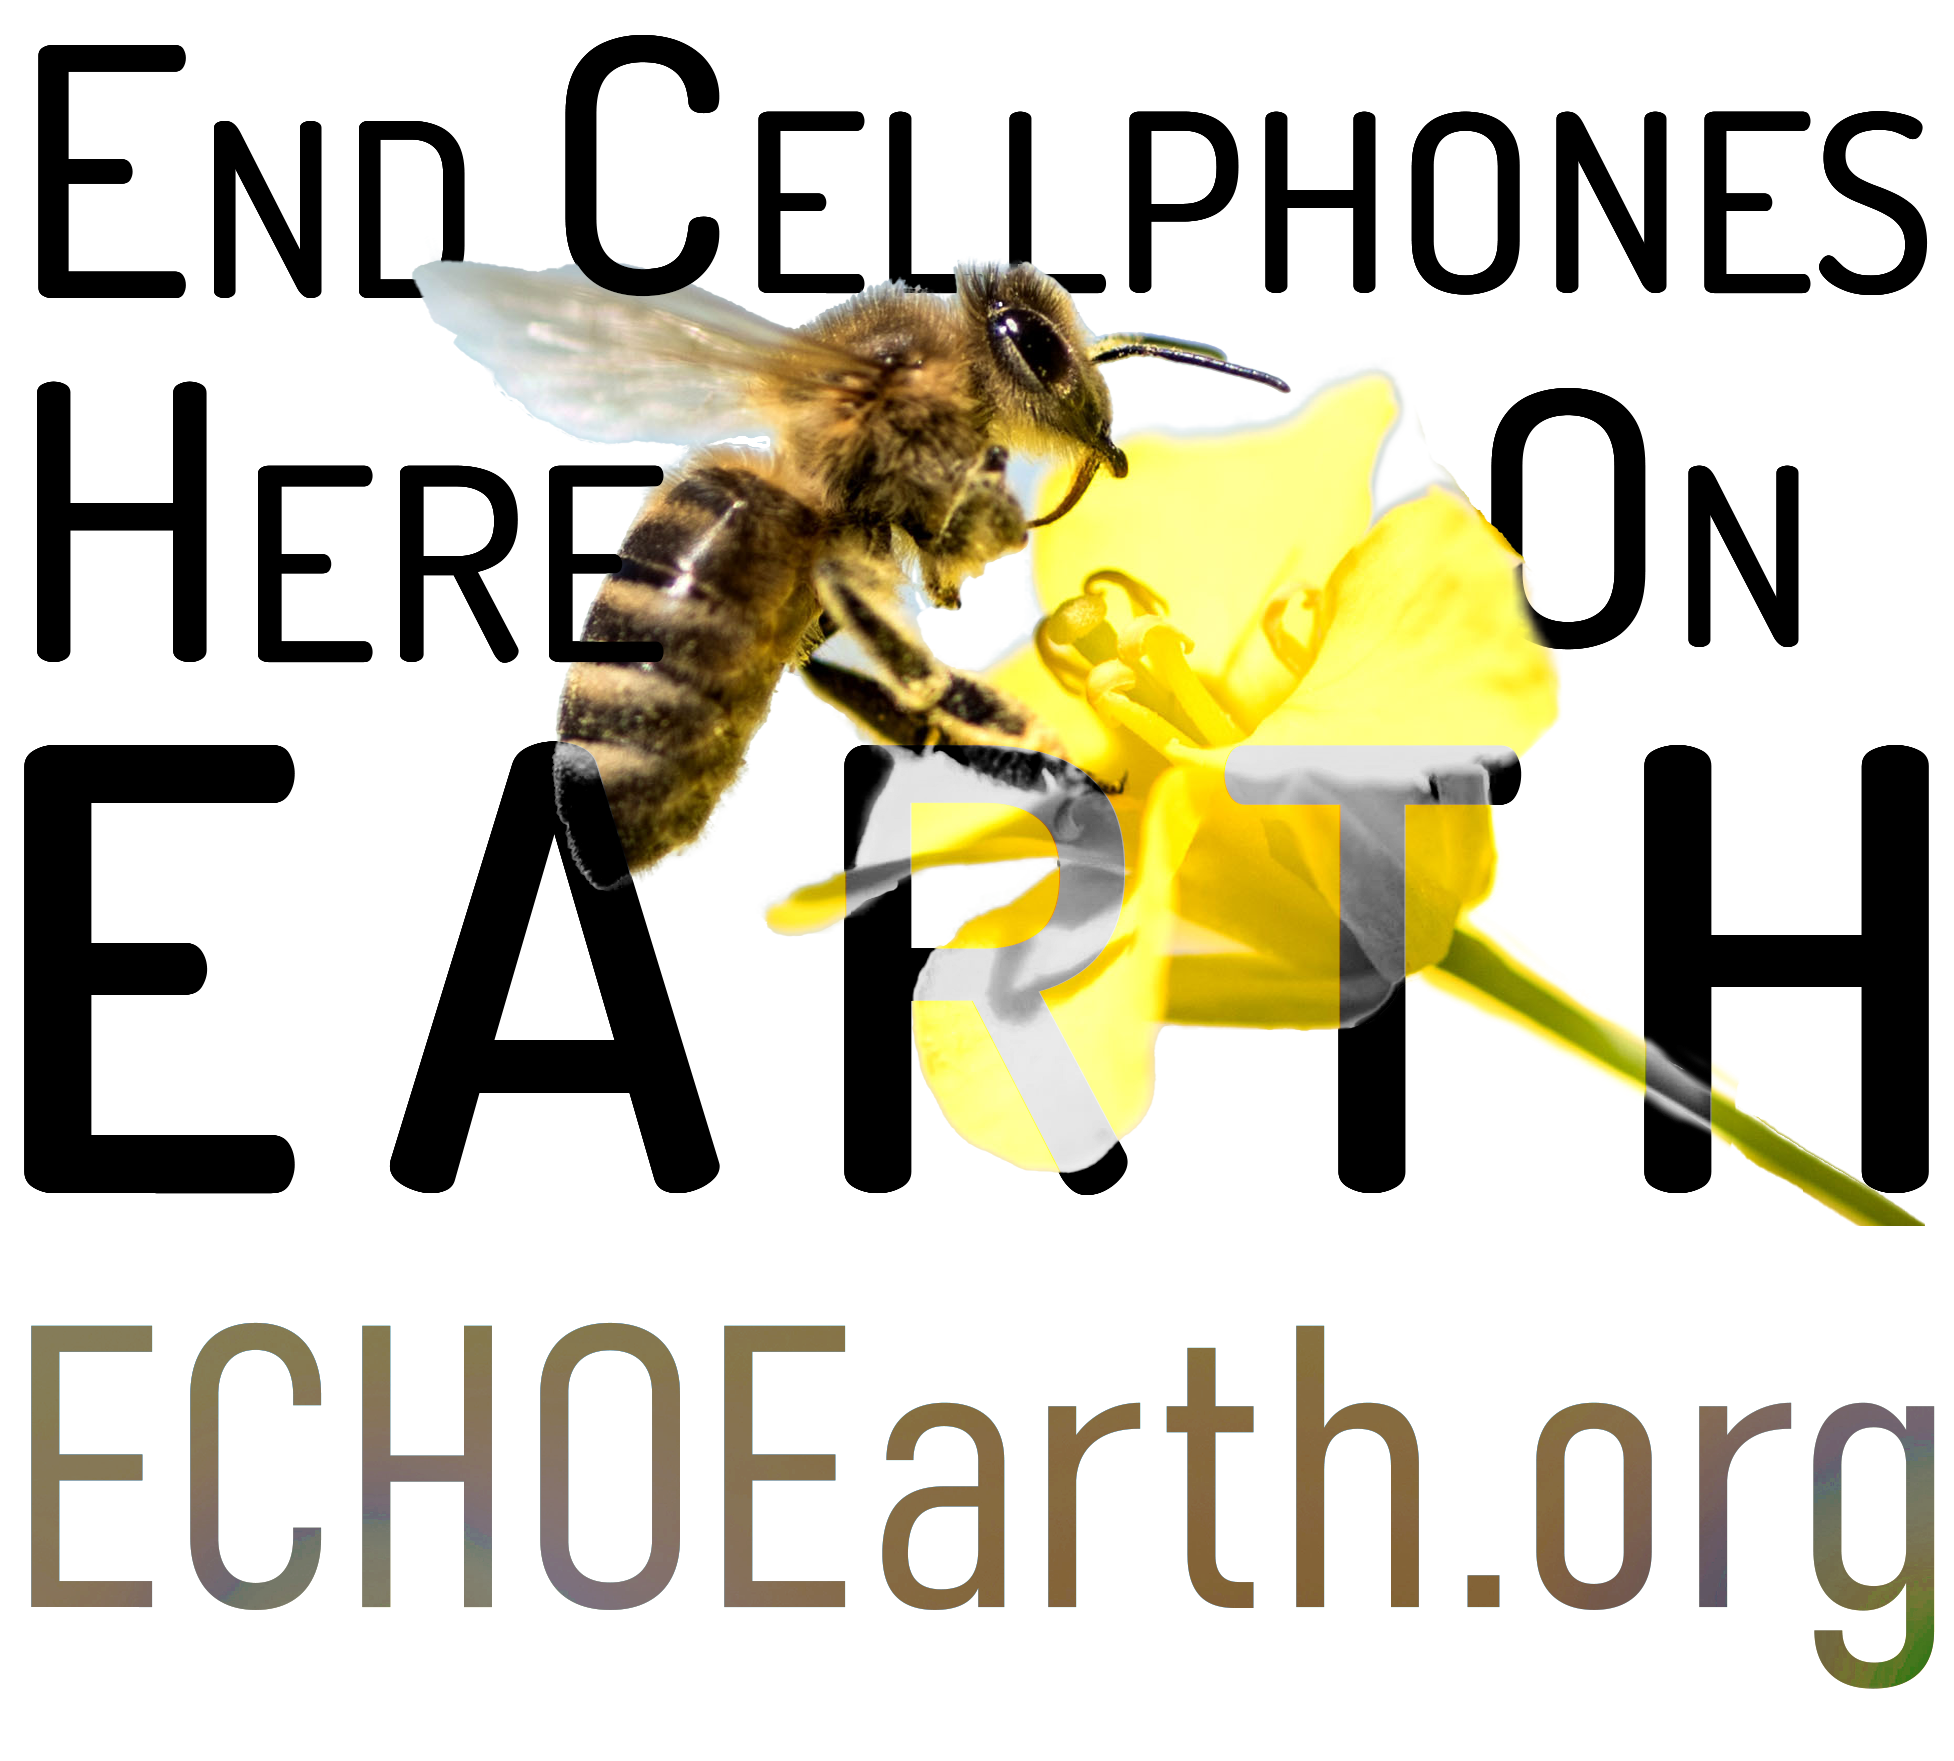 ECHOEarth.org (End Cellphones Here on Earth)